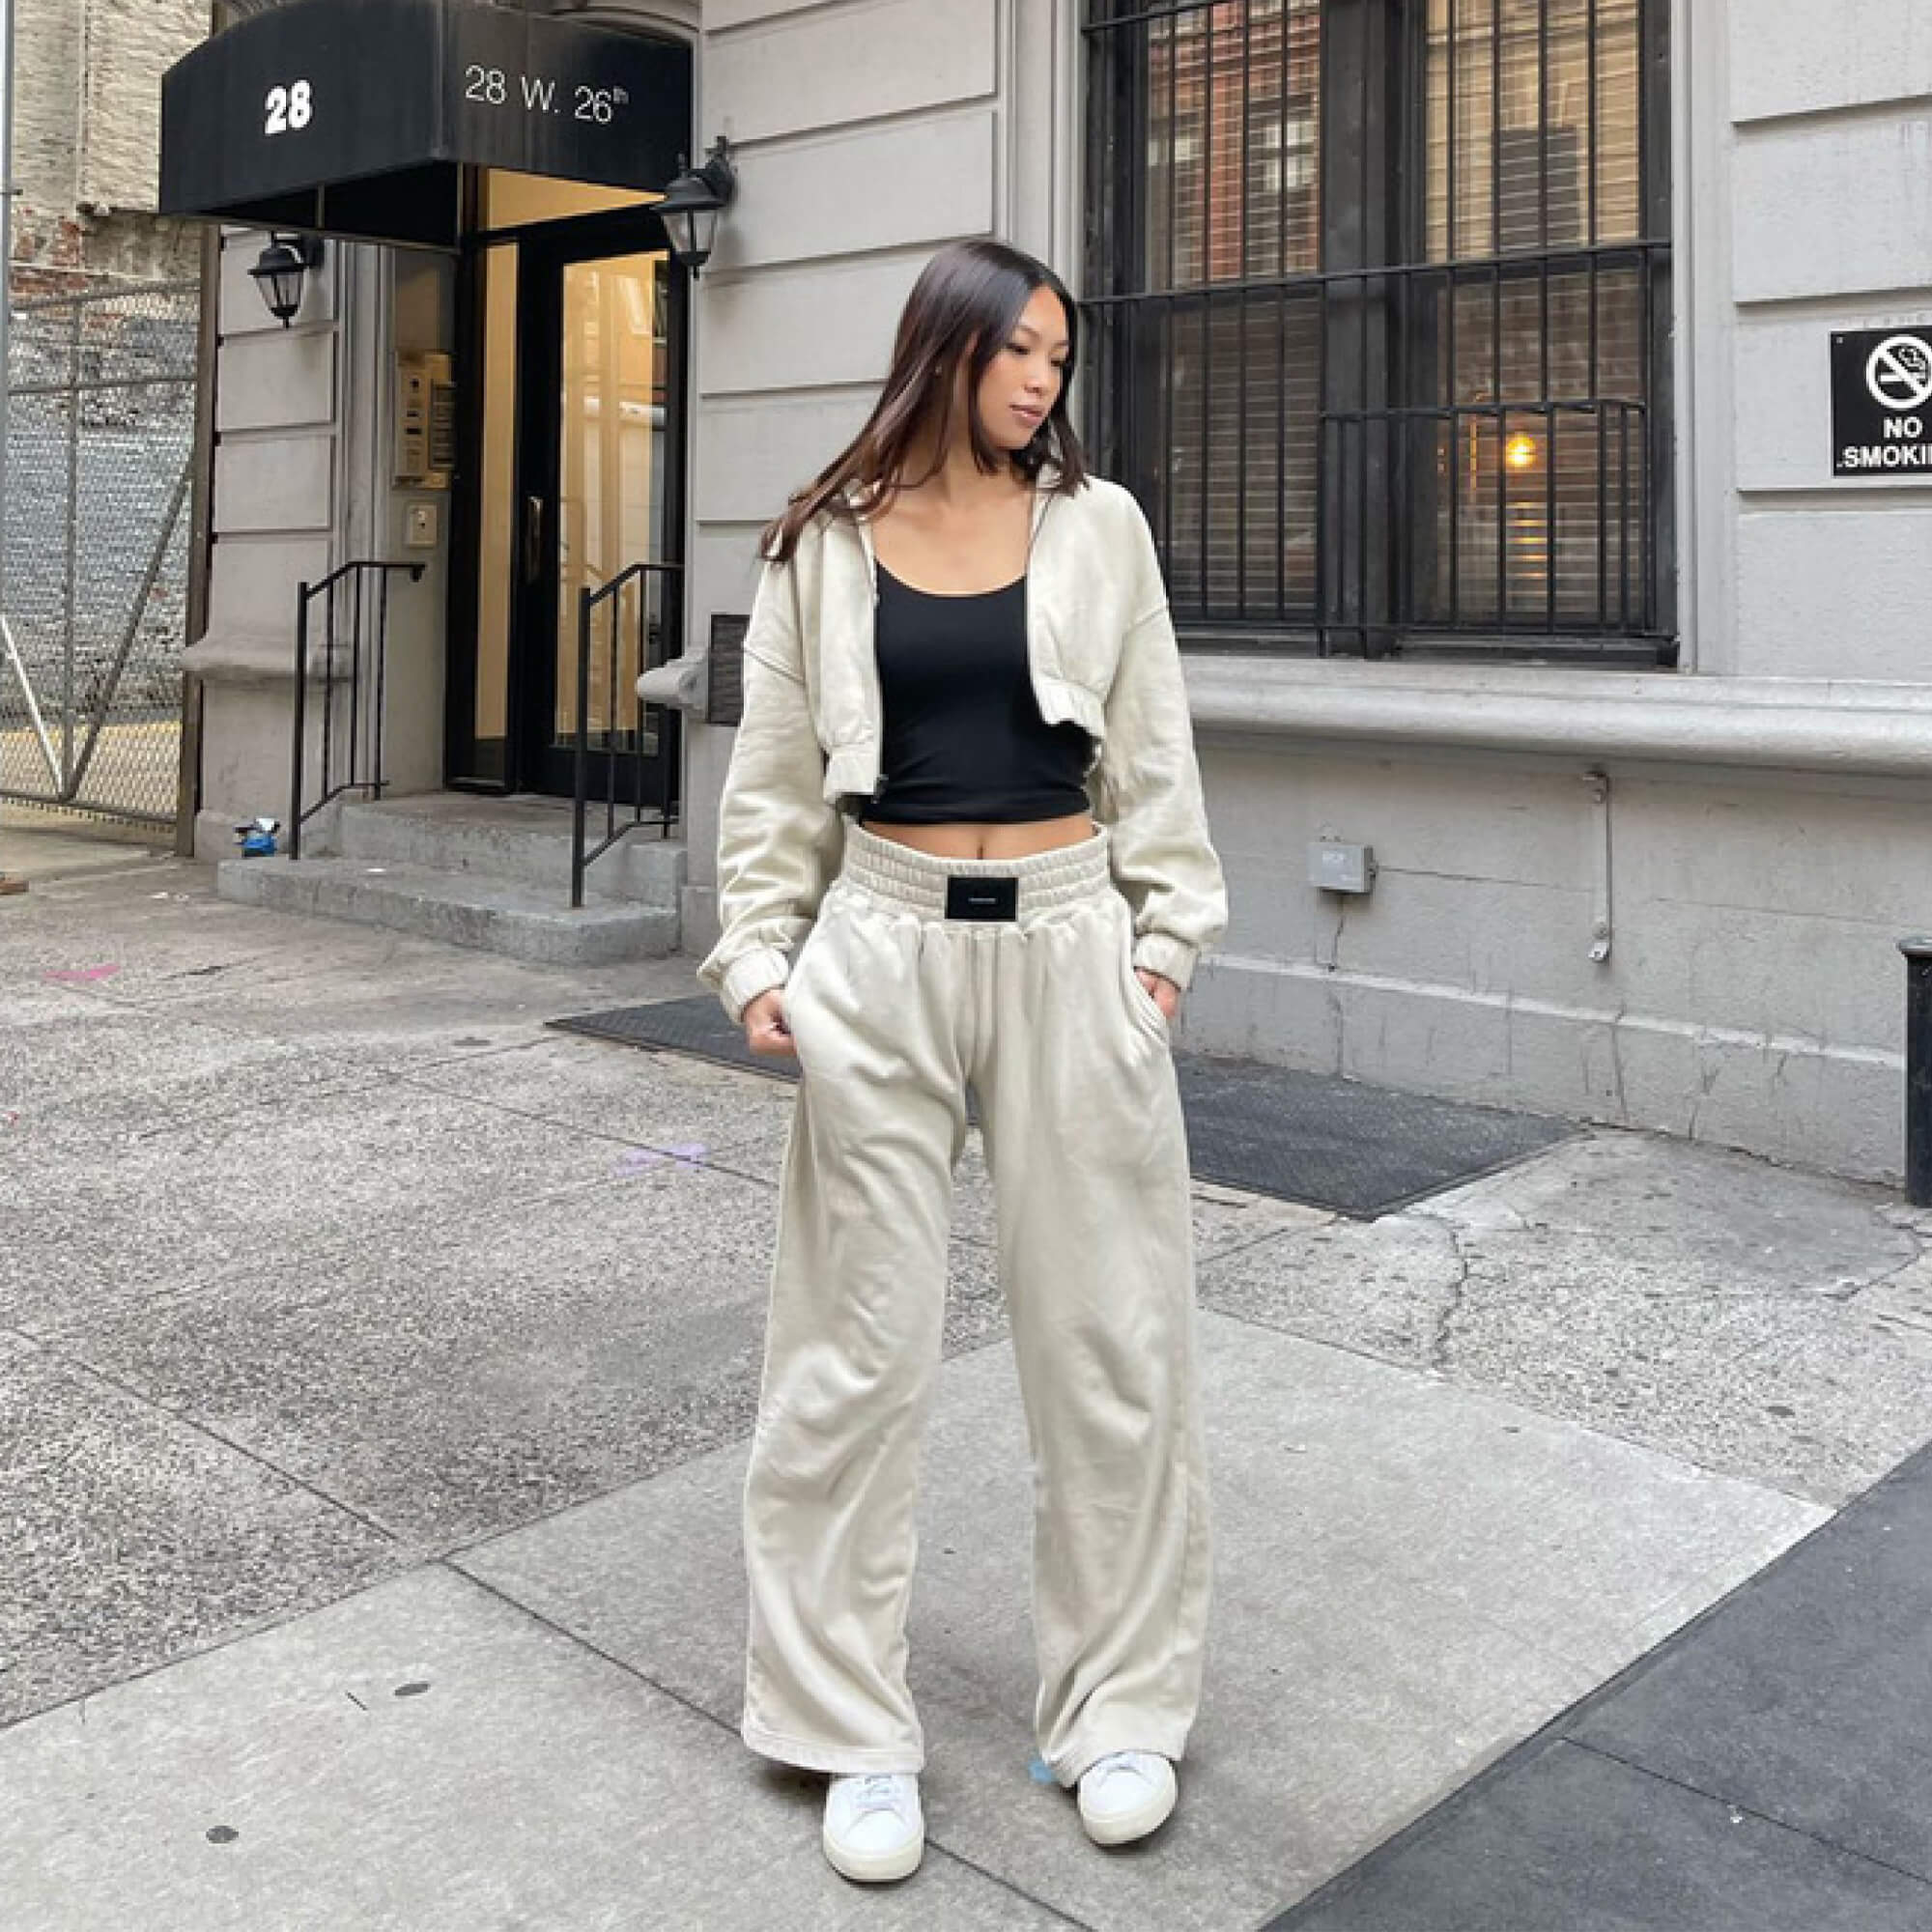 Korean High Waist Fashion Casual OL Ladies Woman Long Pant, Women's  Fashion, Bottoms, Other Bottoms on Carousell